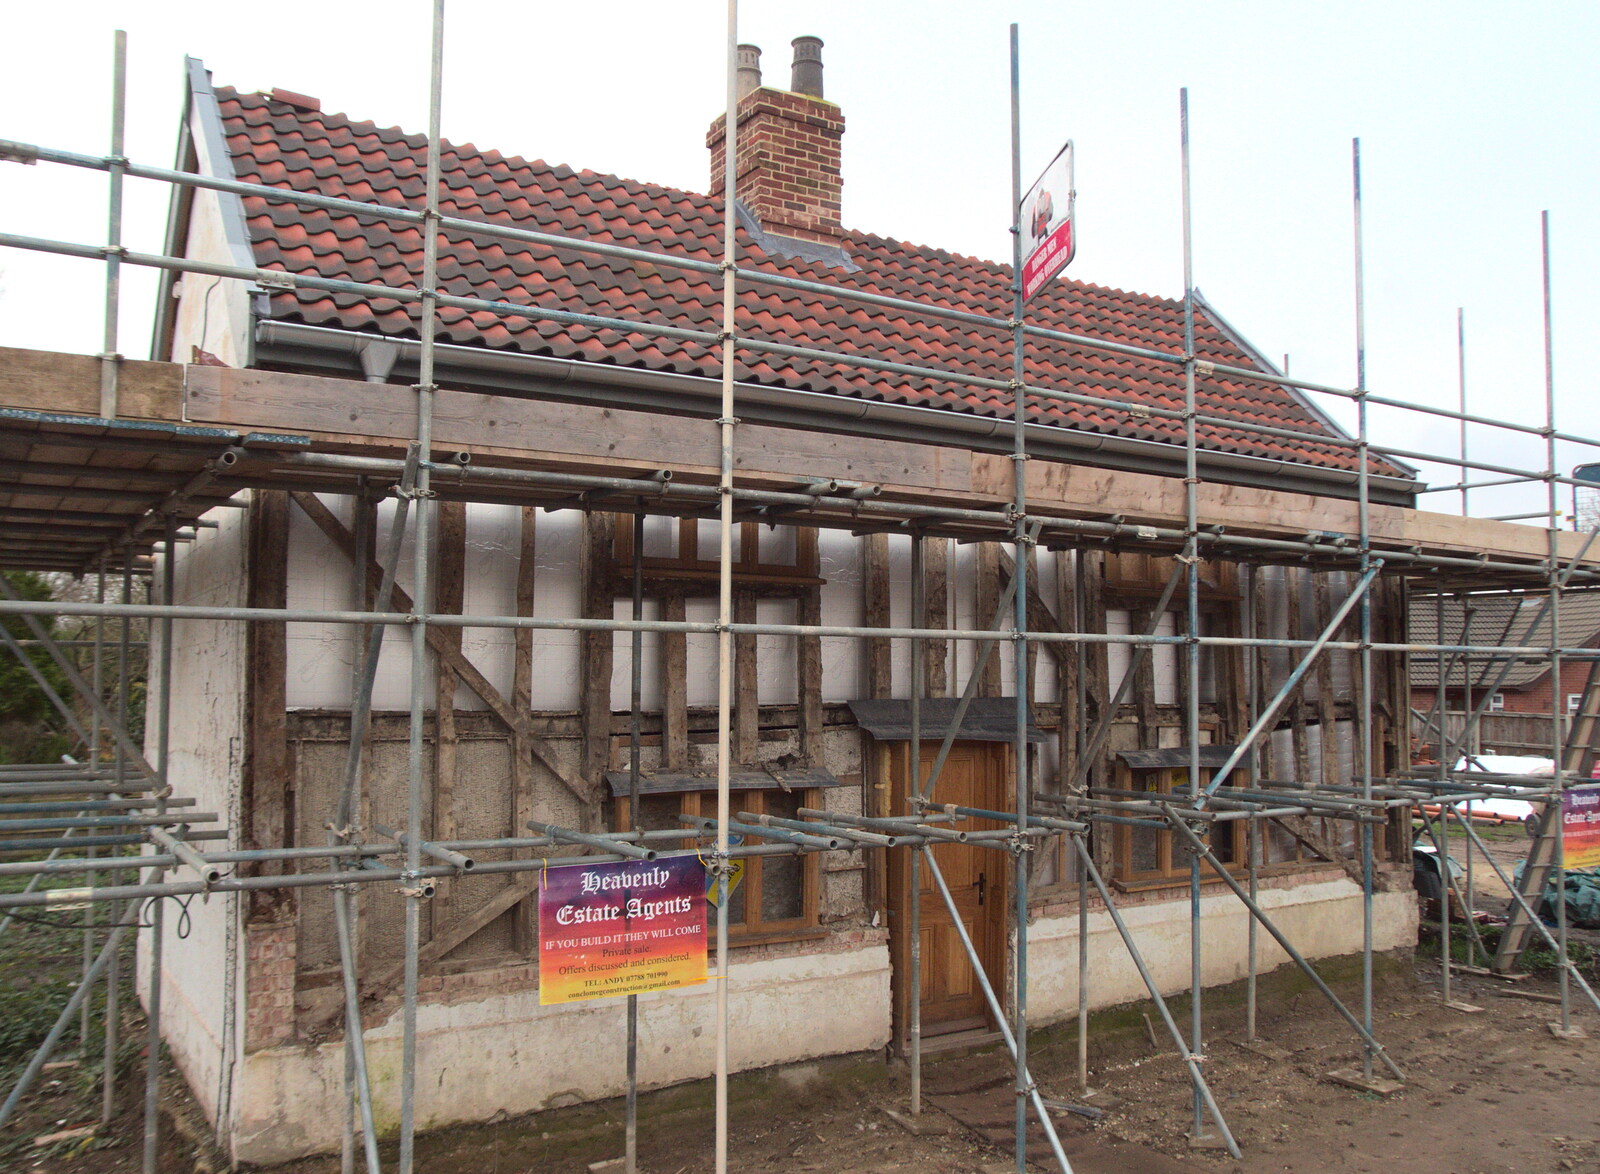 A Wander around Fair Green, Diss, Norfolk - 11th January 2023: The old house is being nicely restored